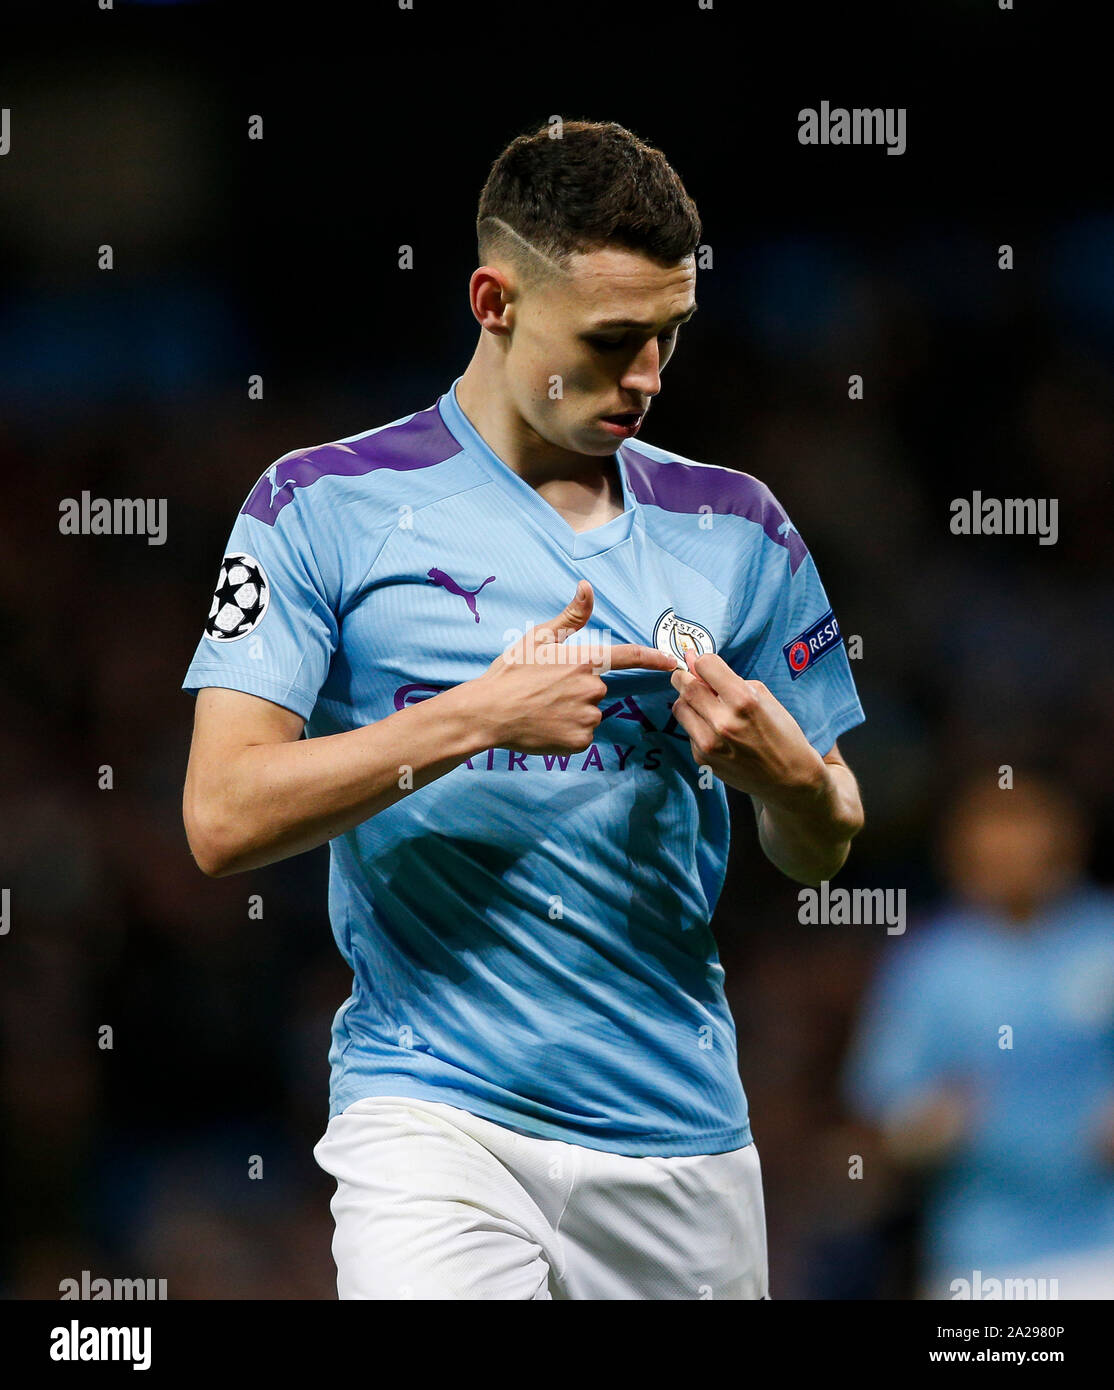 Manchester, UK. 01st Oct, 2019. Phil Foden of Manchester City celebrates after scoring his side's second goal to make the score 2-0 during the UEFA Champions League Group C match between Manchester City and Dinamo Zagreb at the Etihad Stadium on October 1st 2019 in Manchester, England. (Photo by Daniel Chesterton/phcimages.com) Credit: PHC Images/Alamy Live News Stock Photo